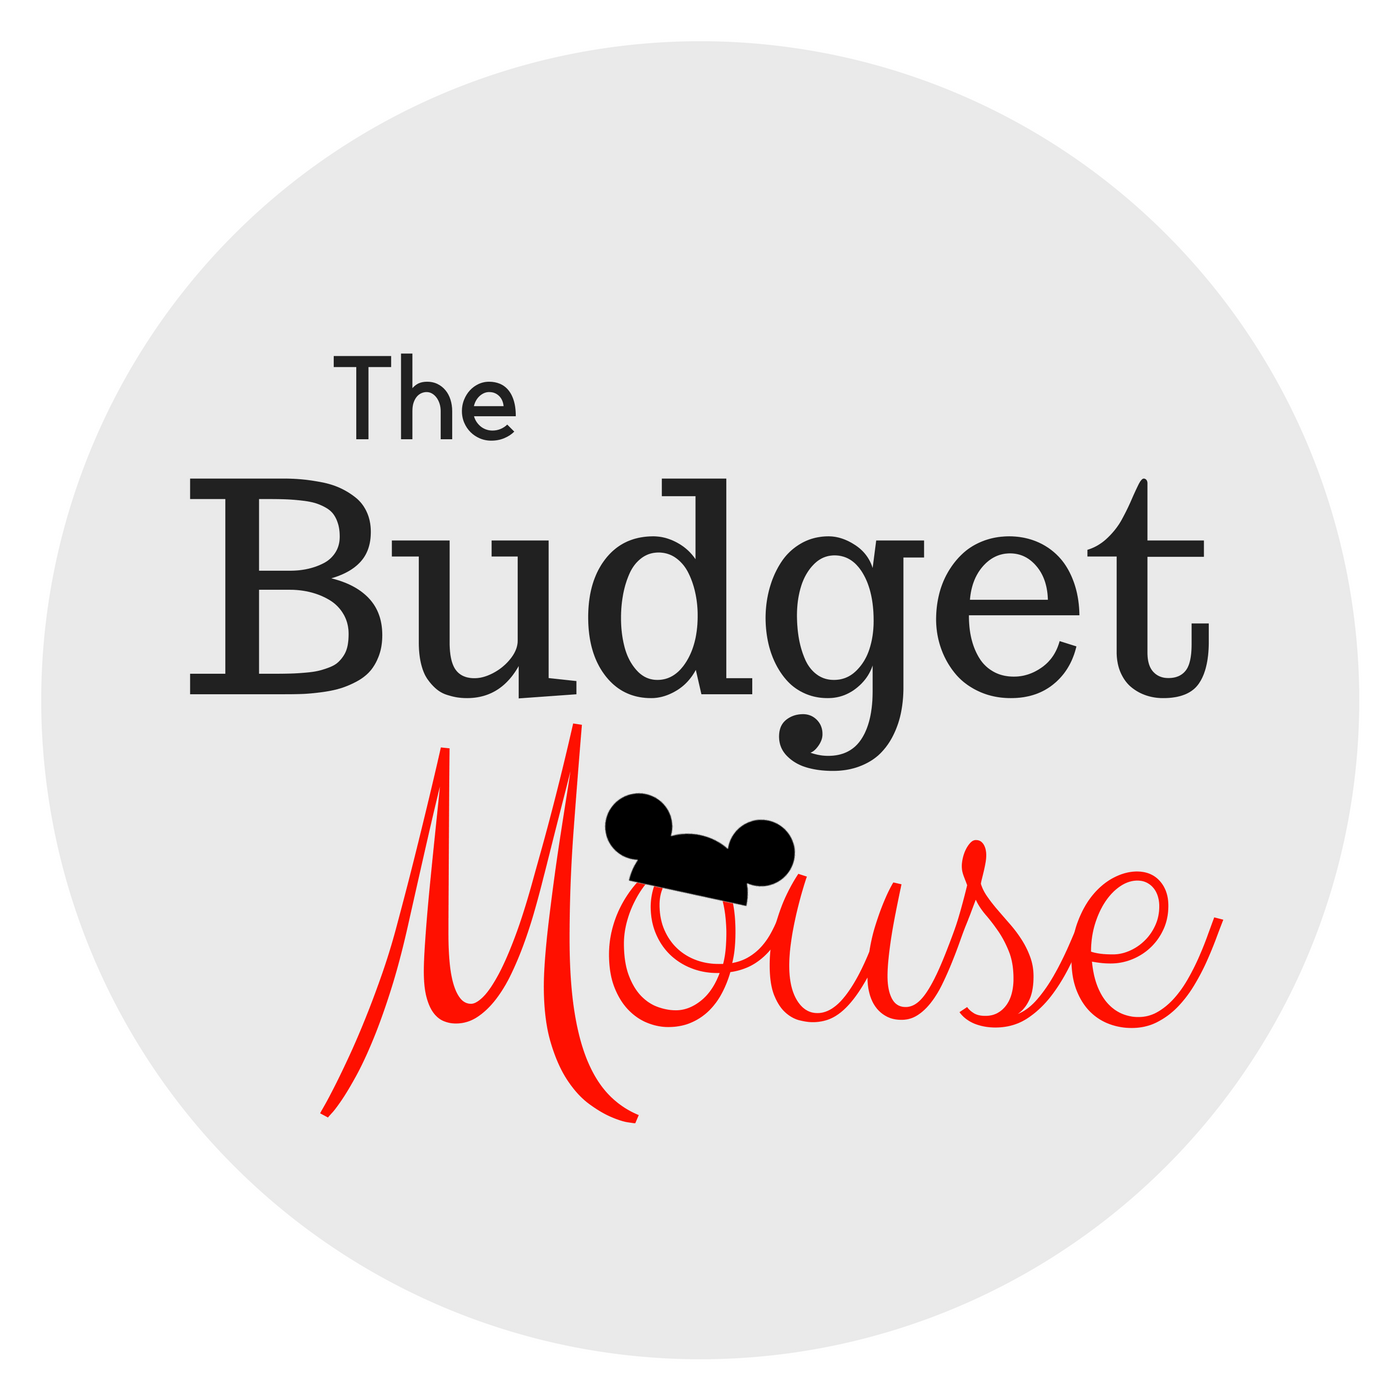 The Budget Mouse logo